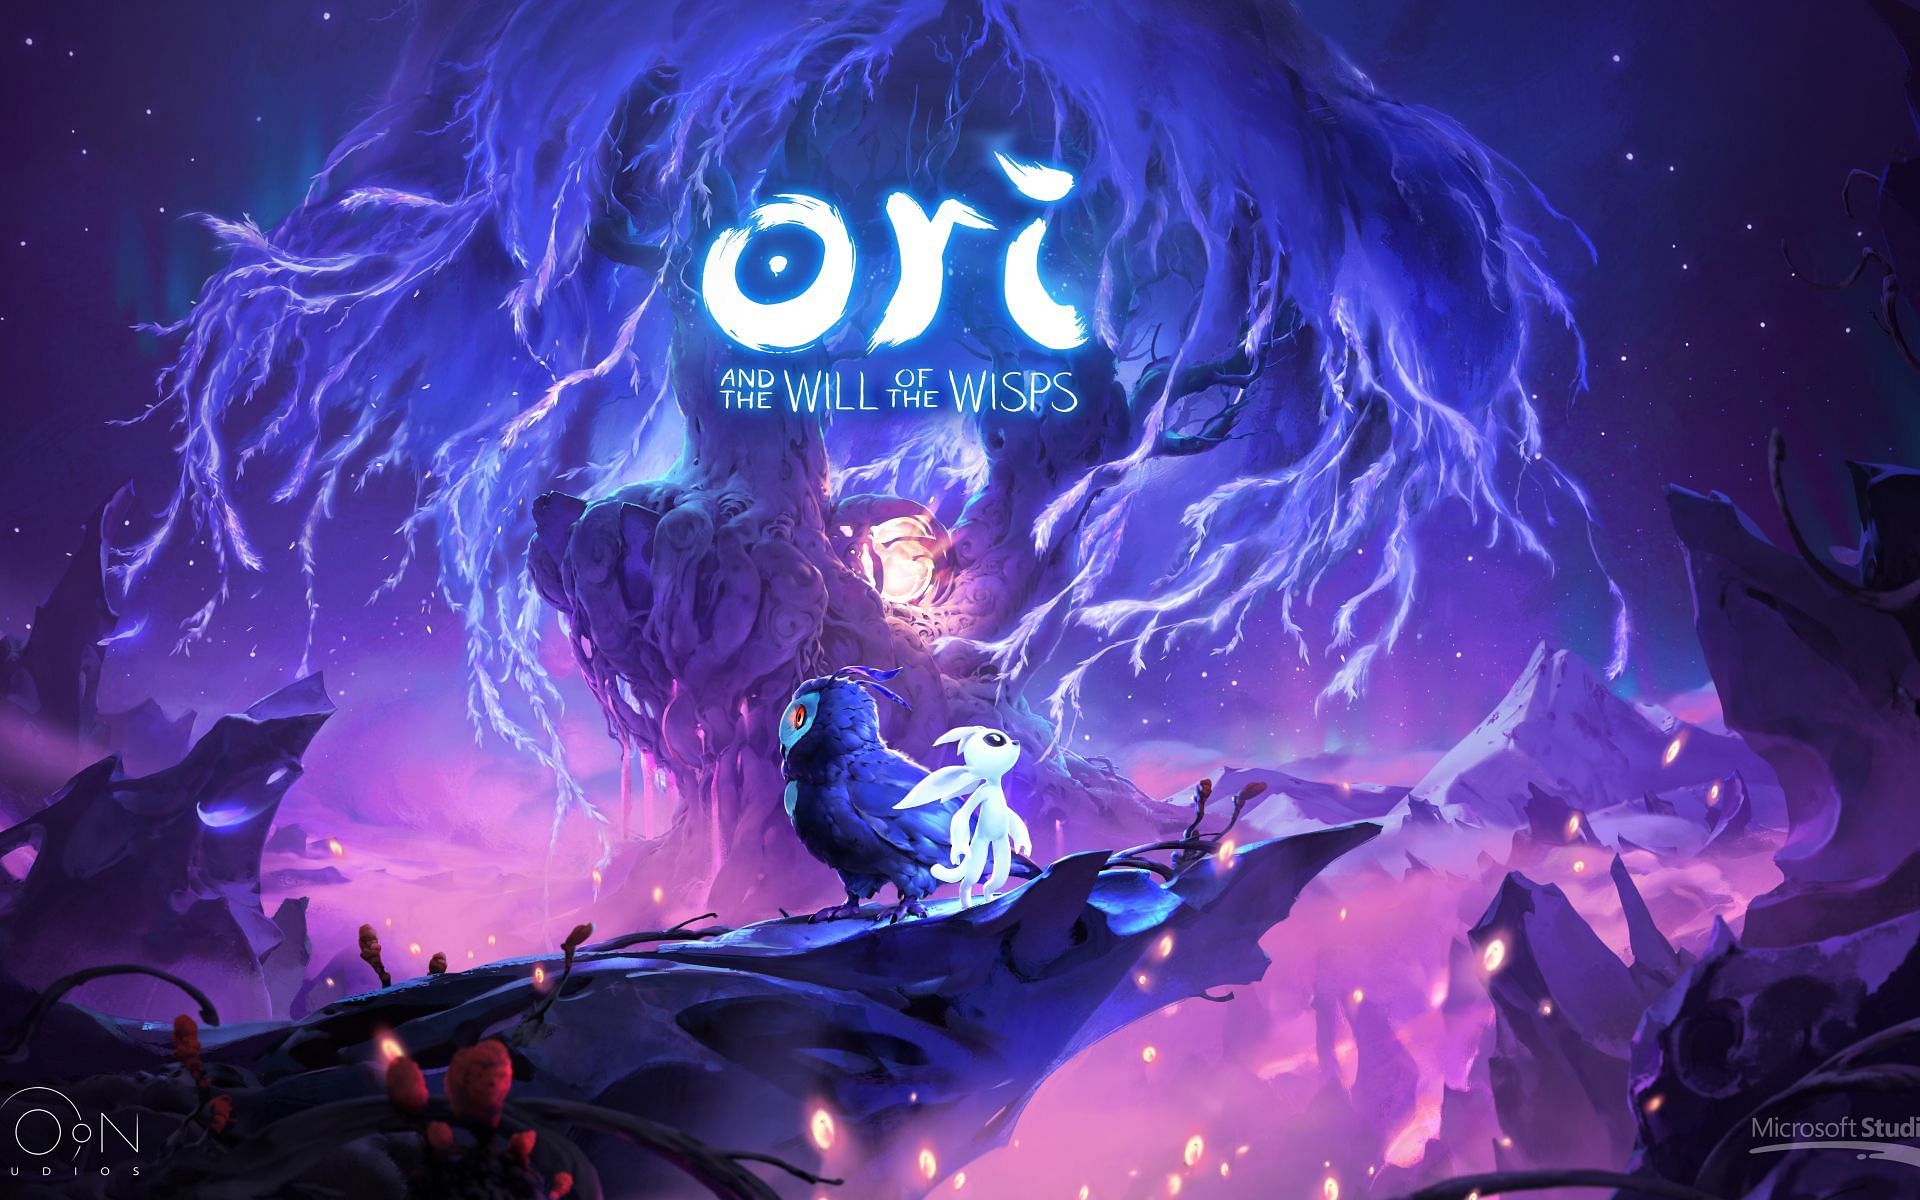 Ori and the Will of the Wisps (image via Xbox Game Studios)